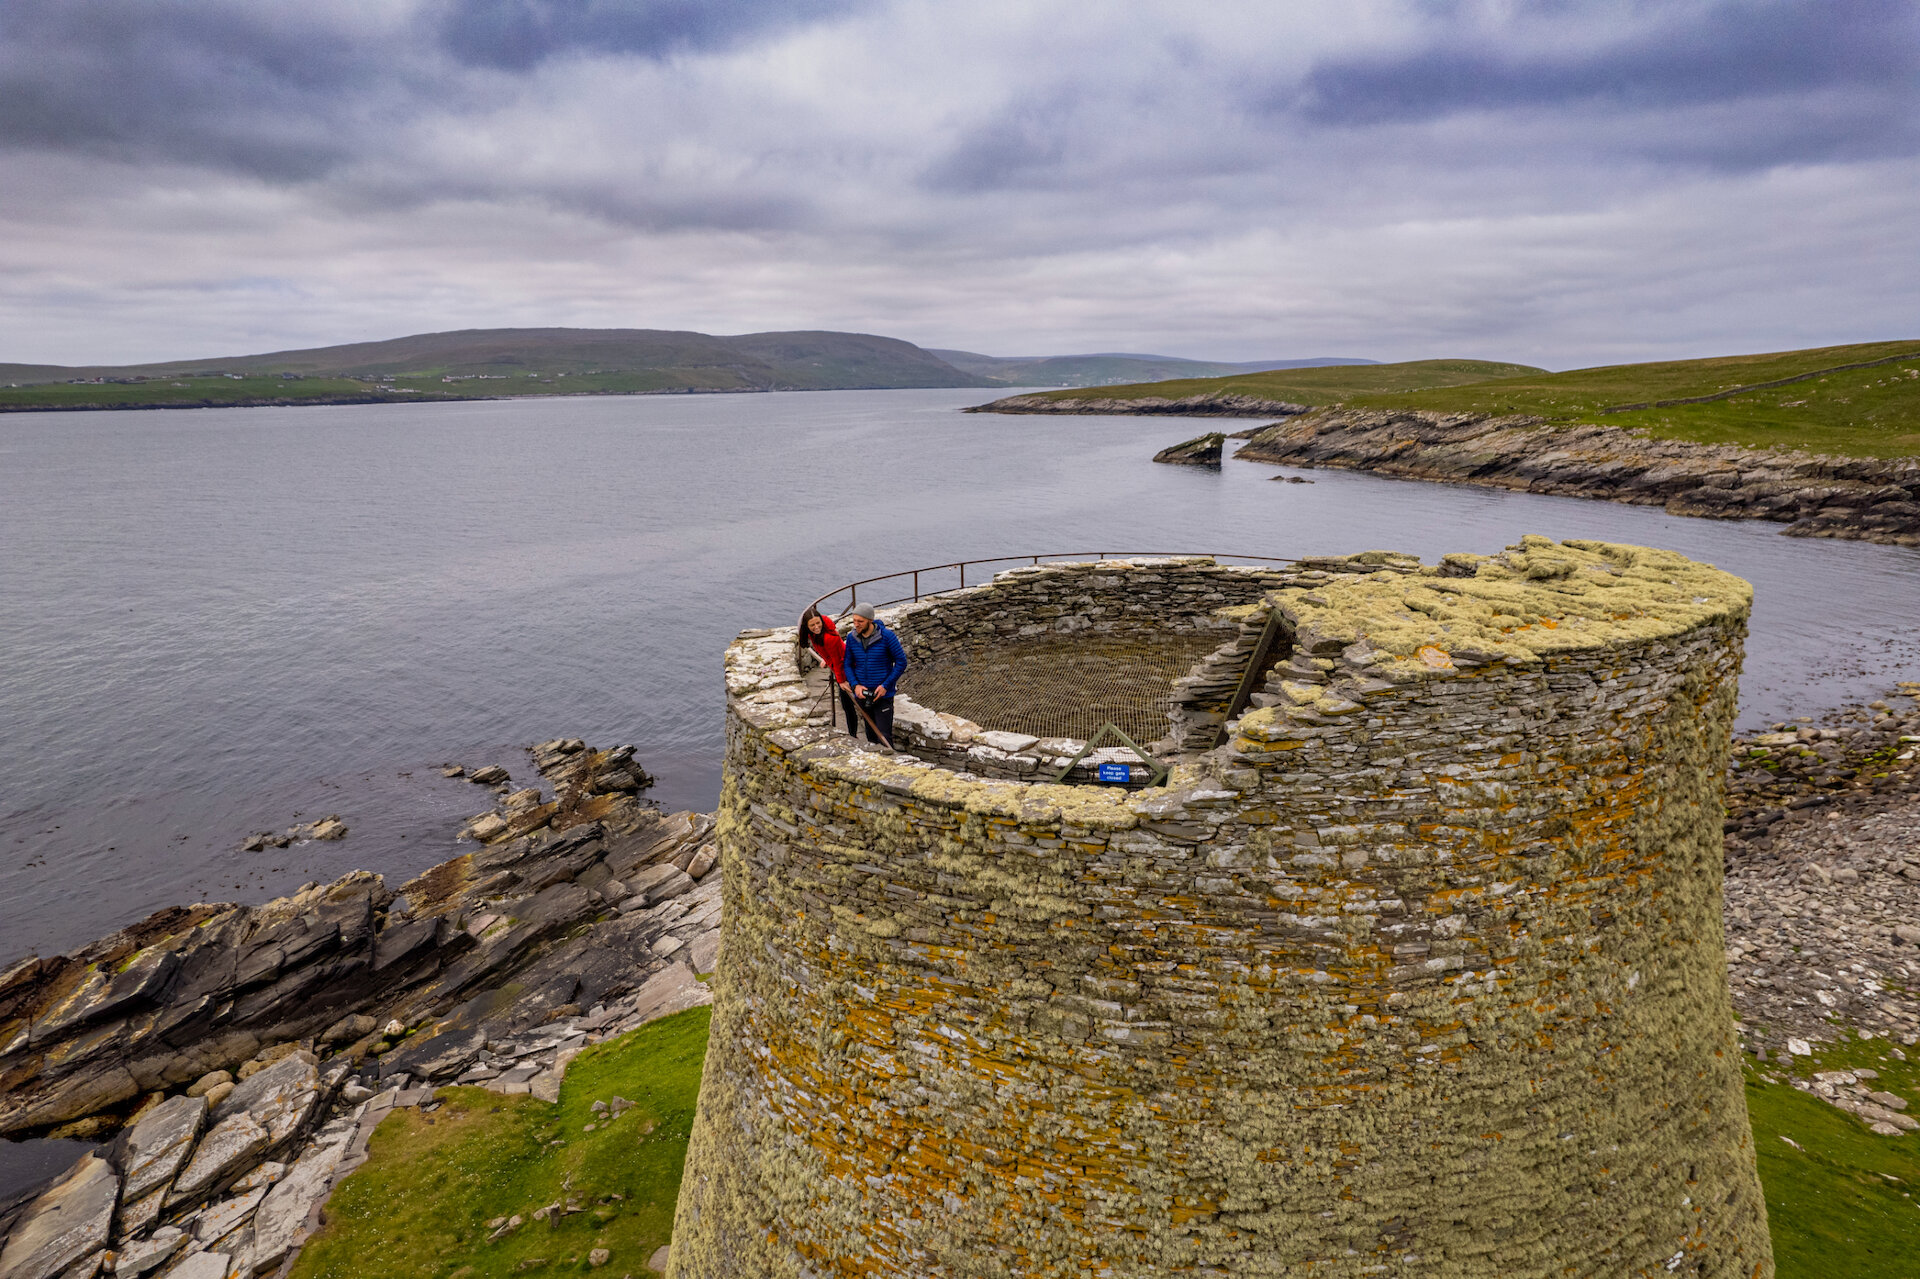 Mousa Broch is a must see for anyone interested in exploring Shetland's historical sites.